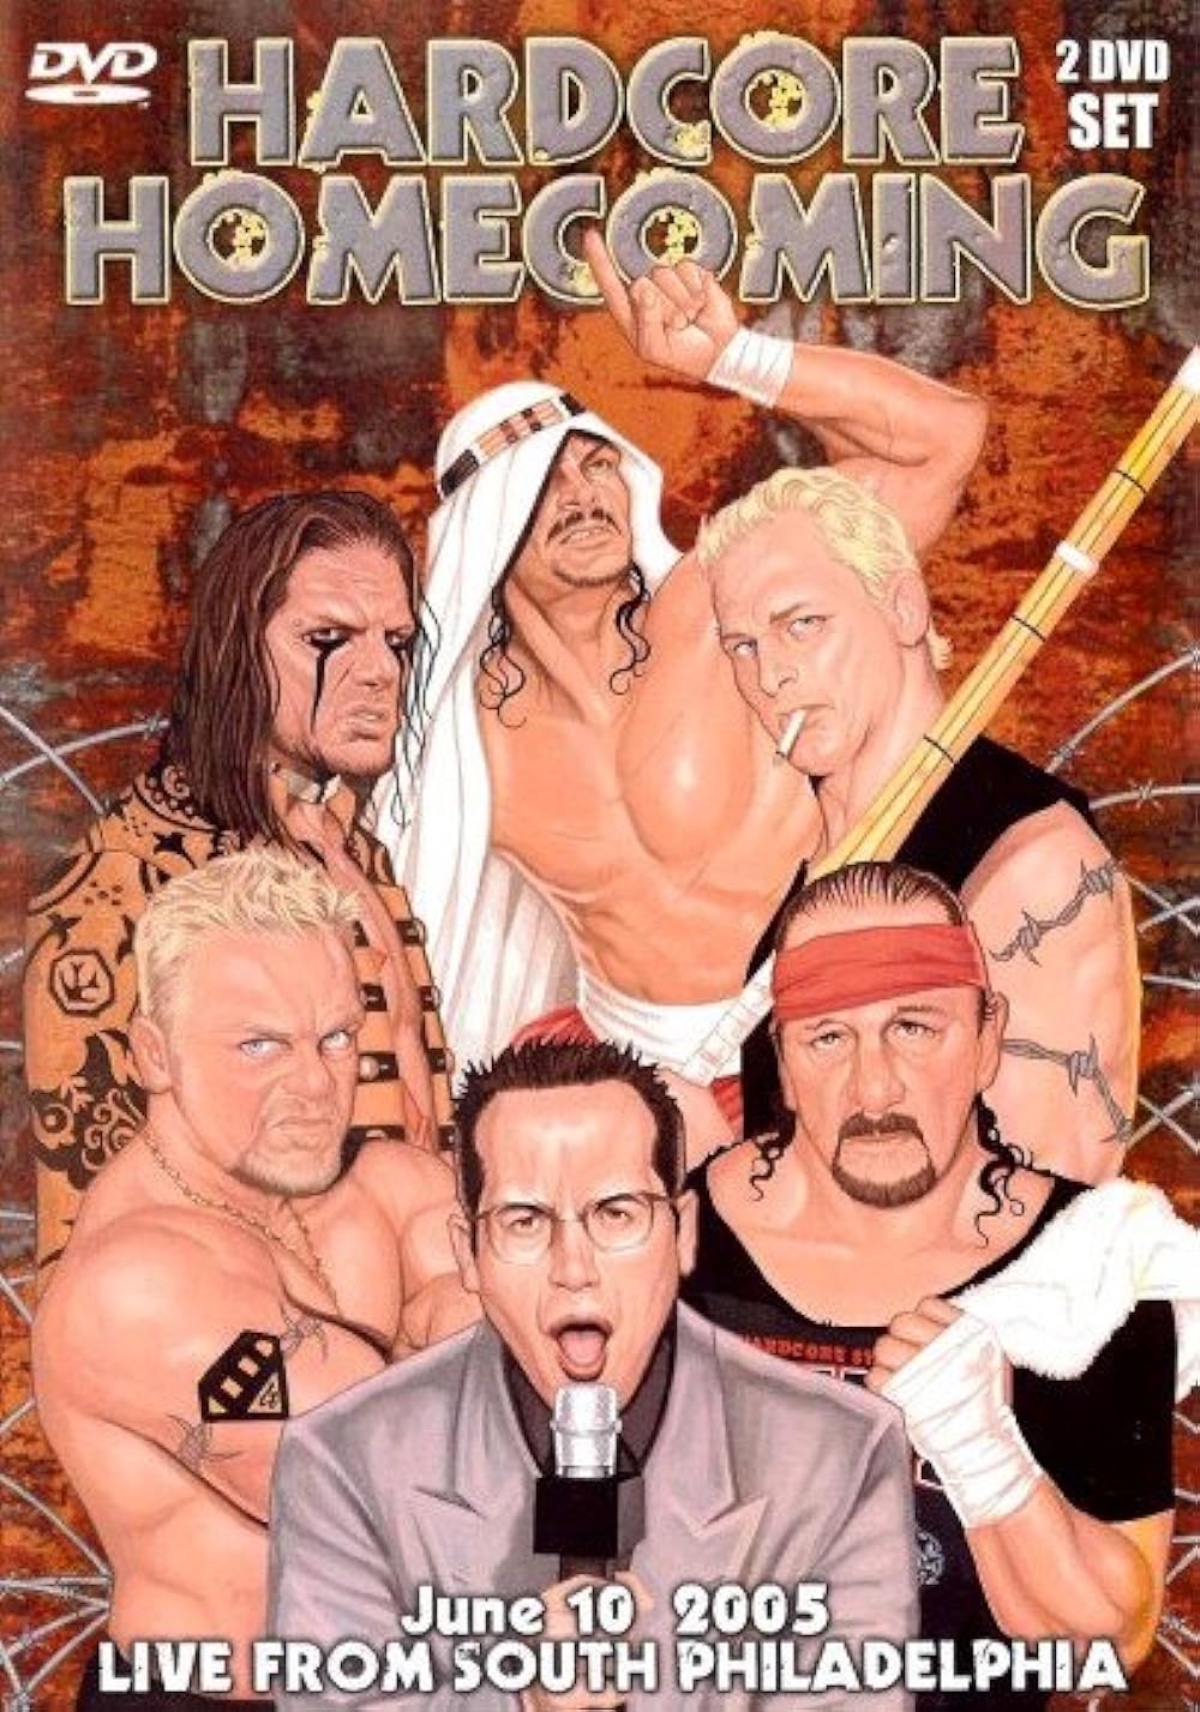 Hardcore homecoming dvd cover